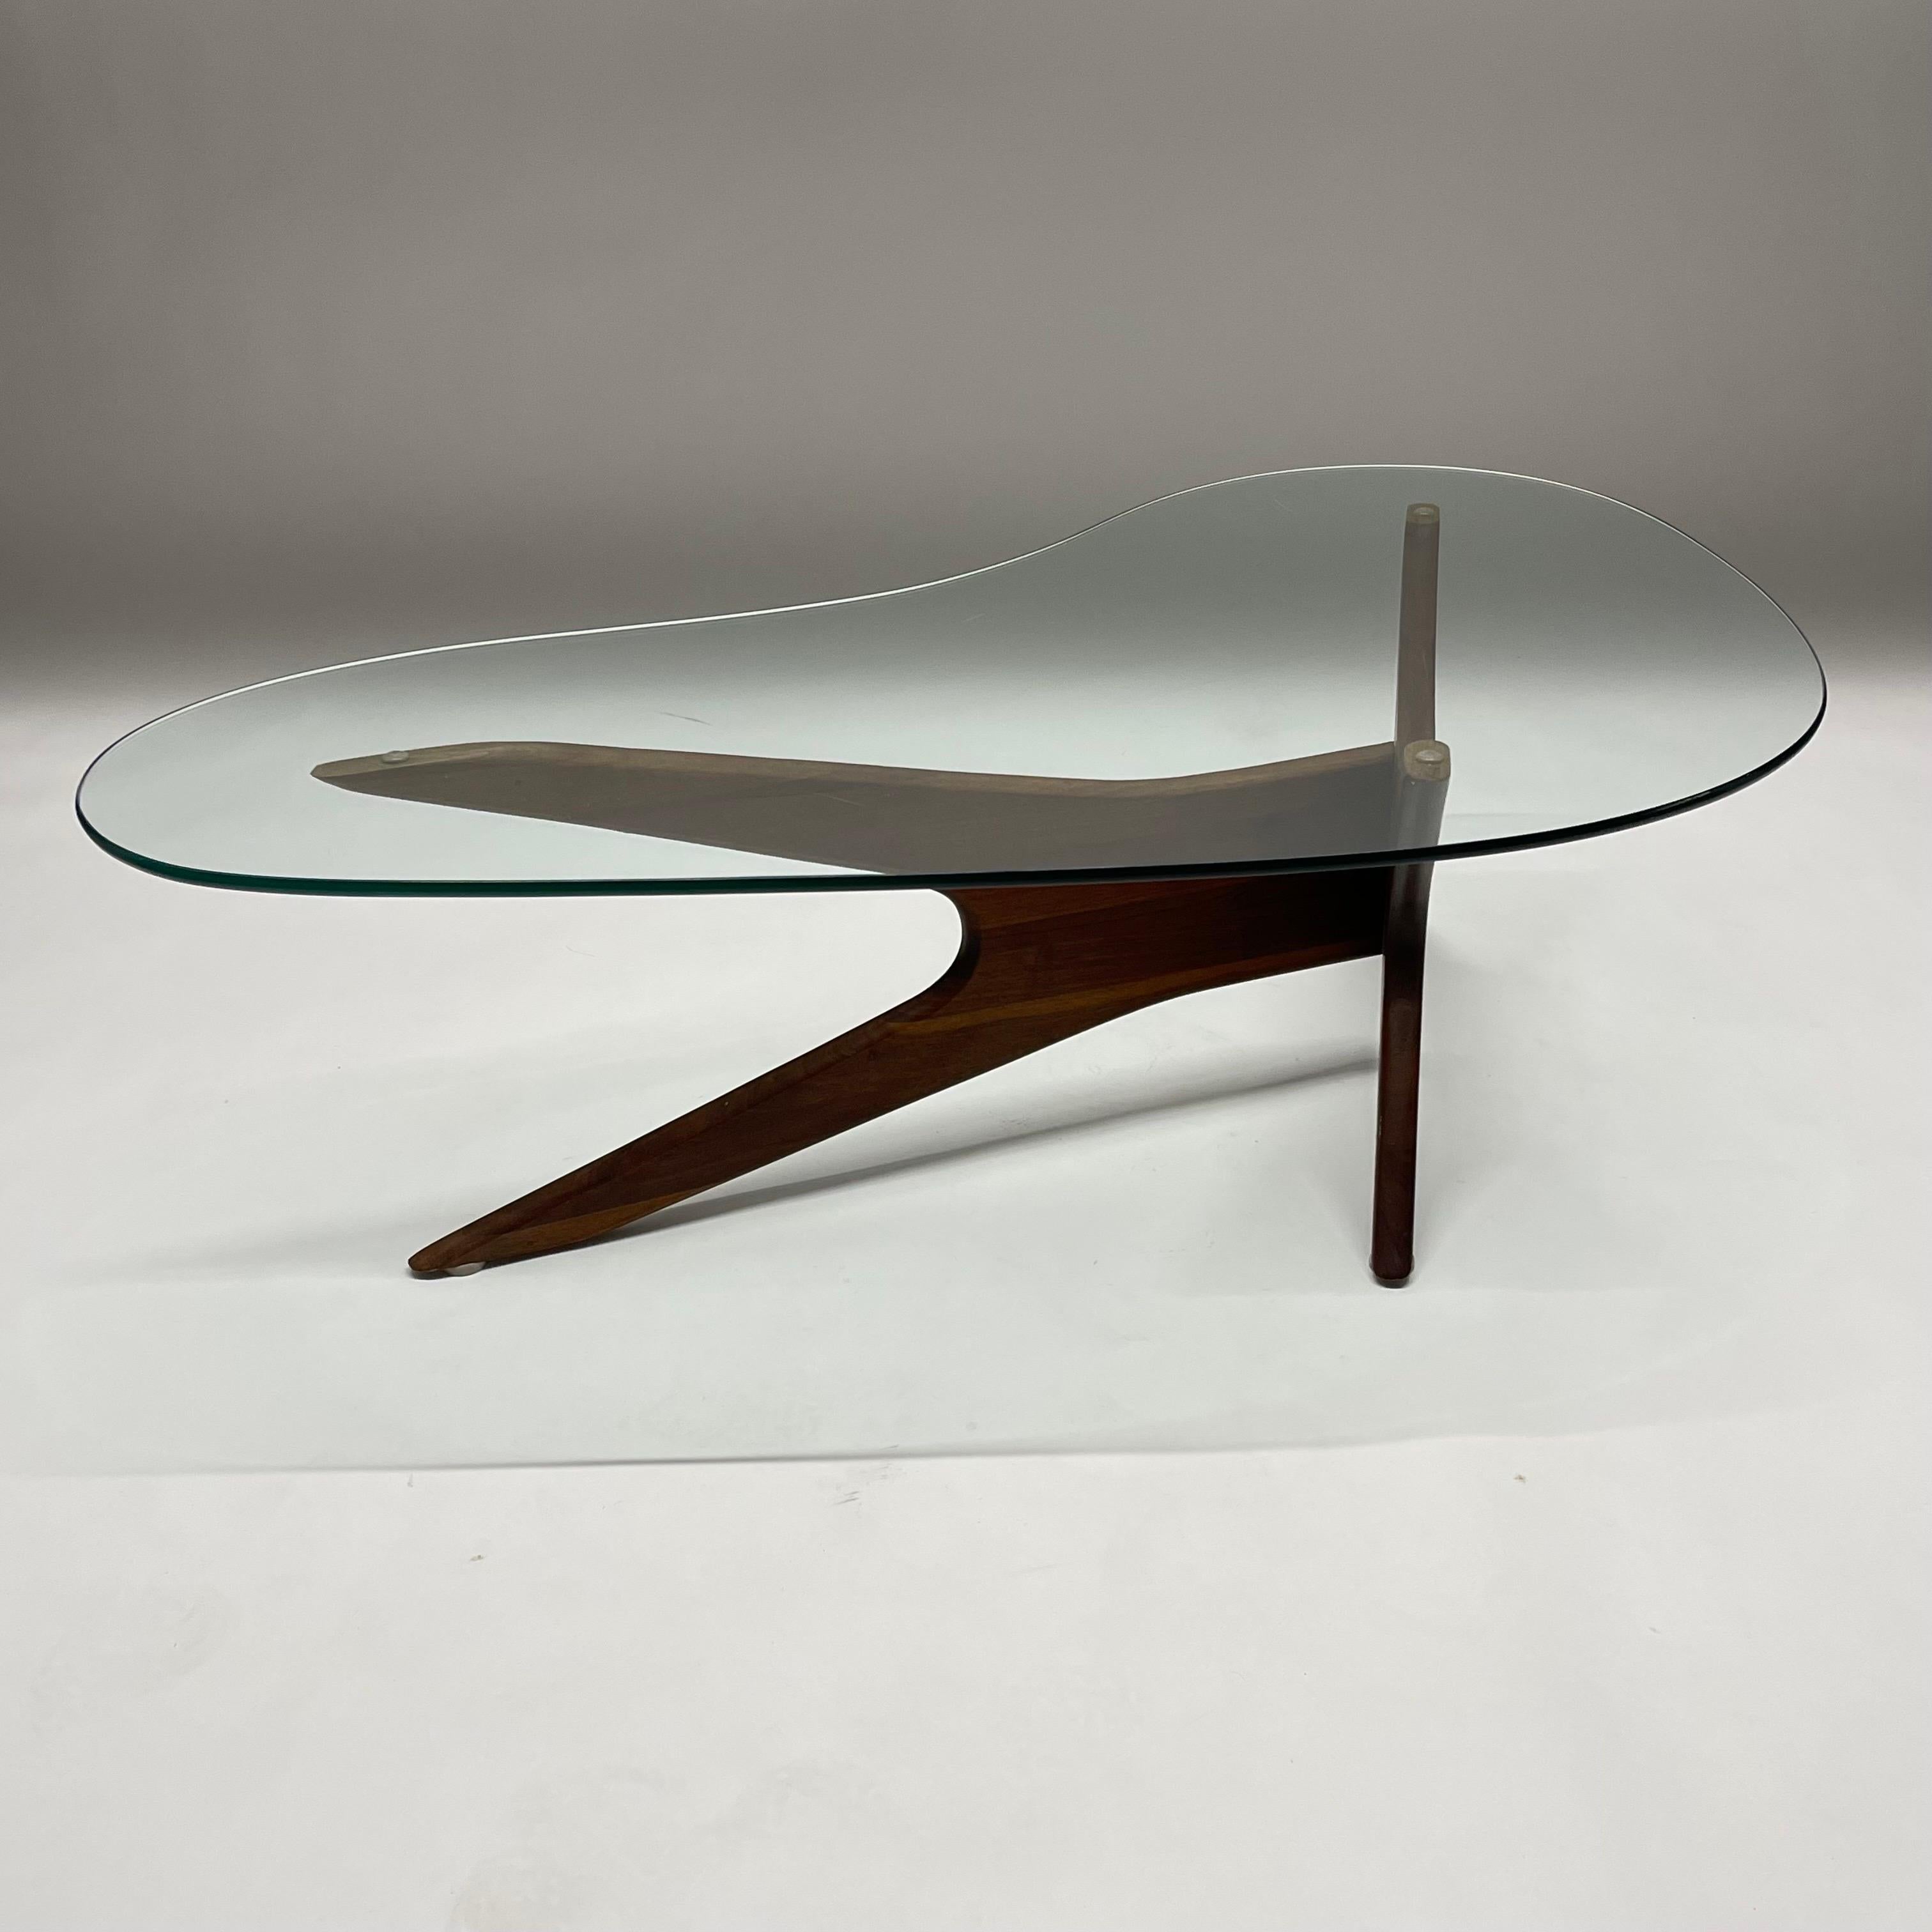 American Rare Adrian Pearsall Walnut and Glass Biomorphic Kidney Coffee or Cocktail Table